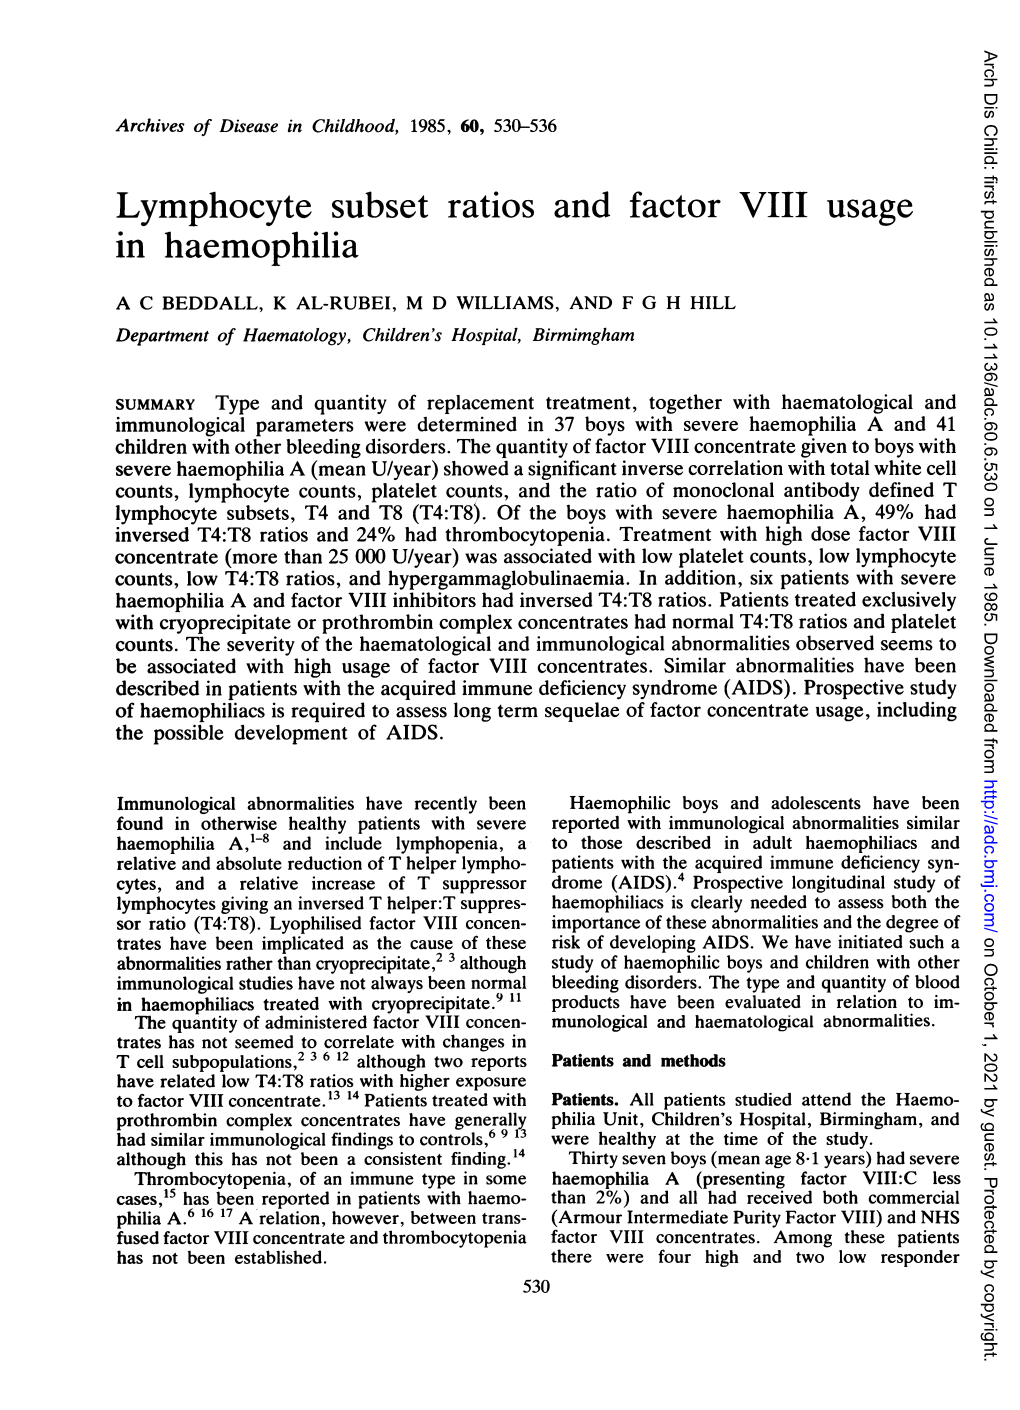 Lymphocyte Subset Ratios and Factor VIII Usage in Haemophilia